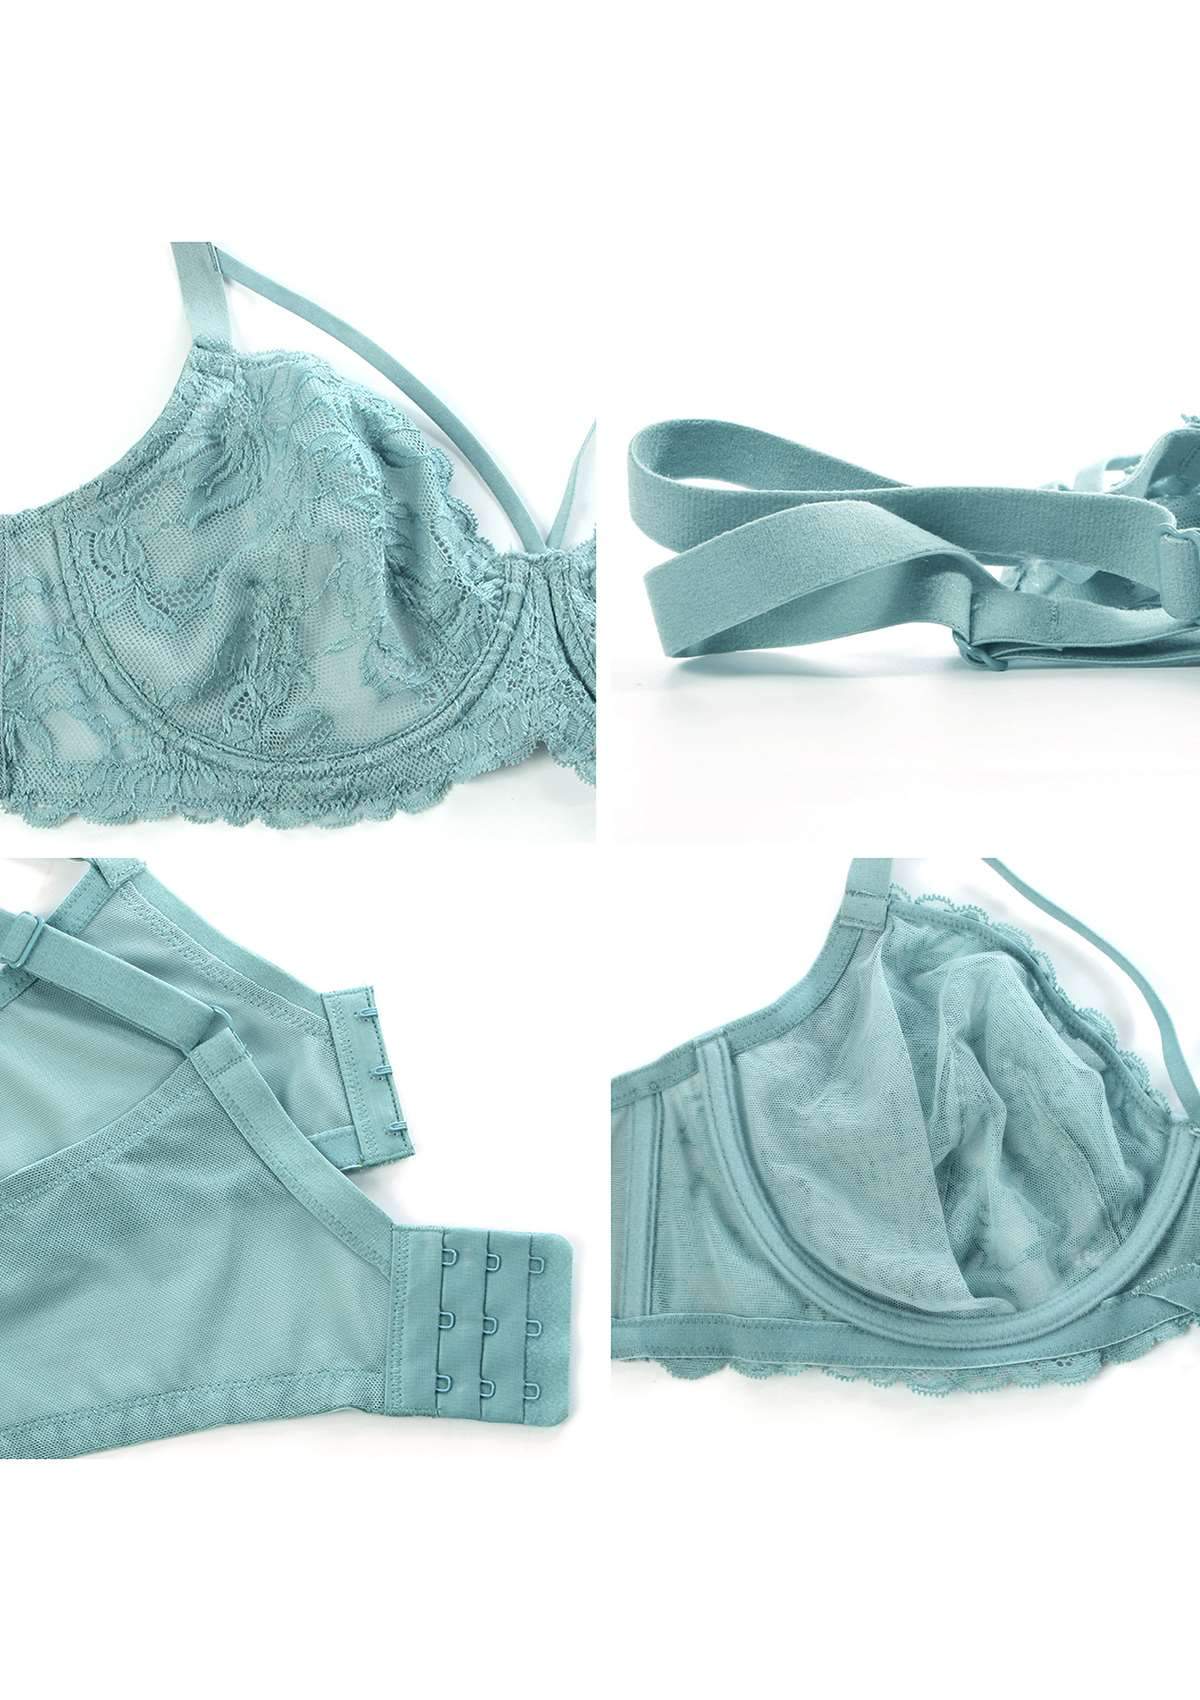 HSIA Pretty In Petals Unlined Lace Bra: Comfortable And Supportive Bra - Pewter Blue / 42 / C